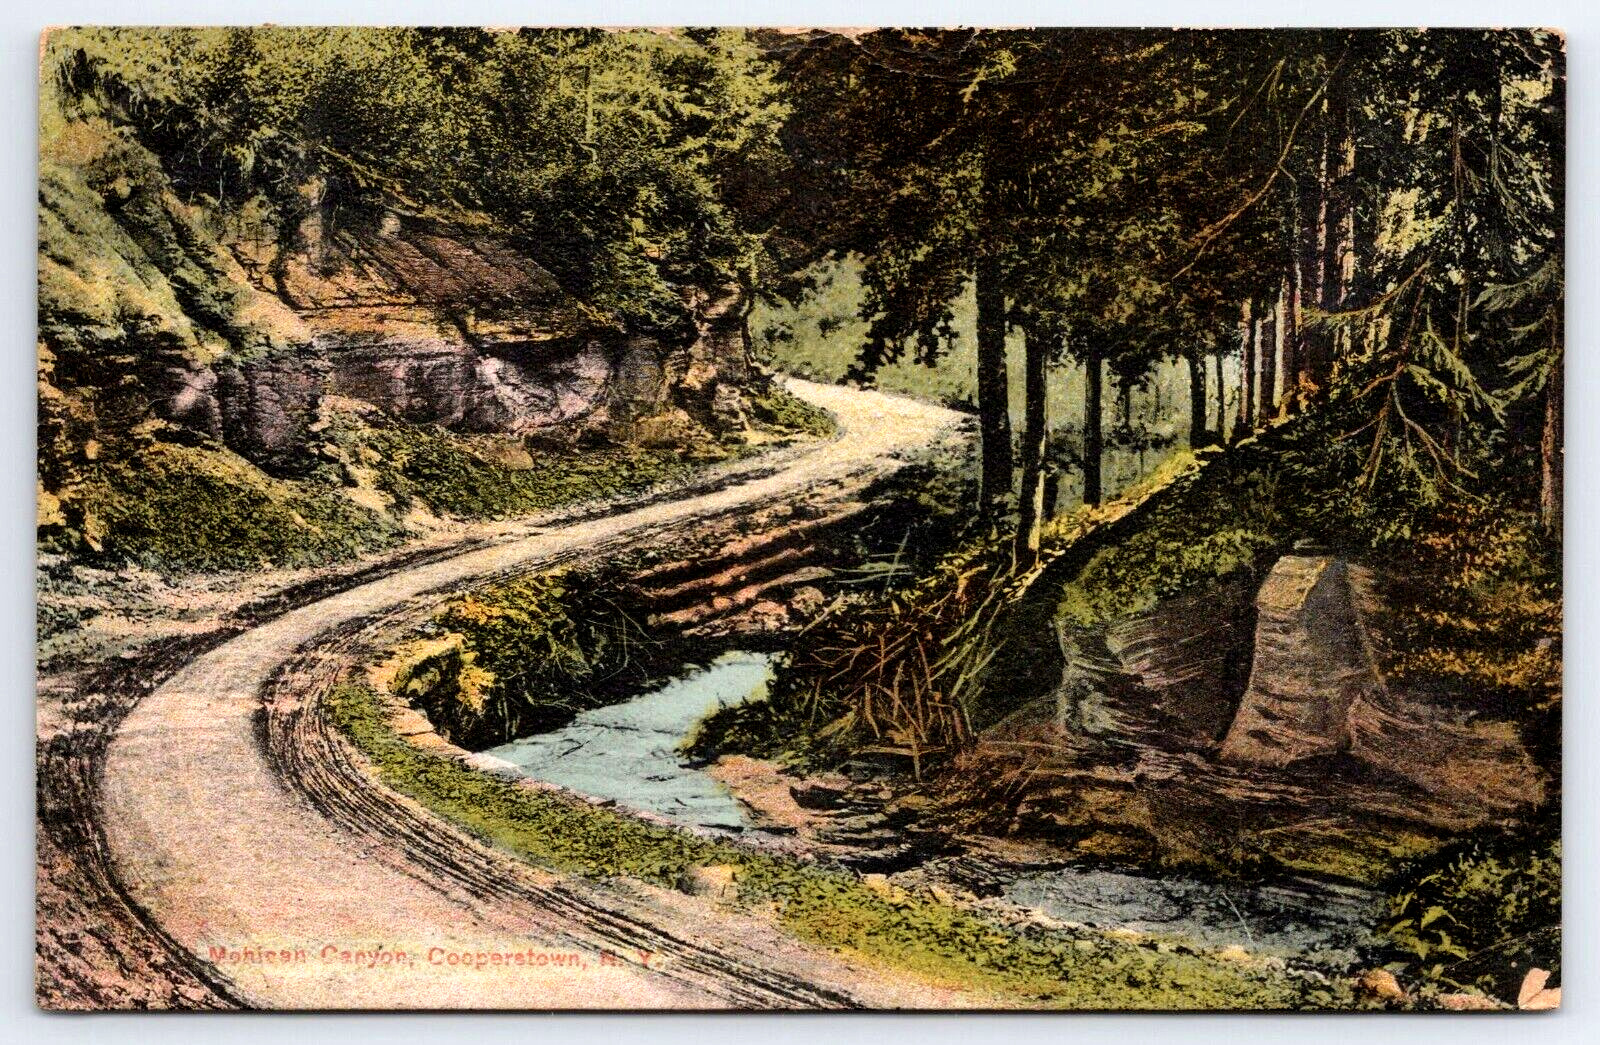 Postcard Cooperstown New York Mohican Canyon